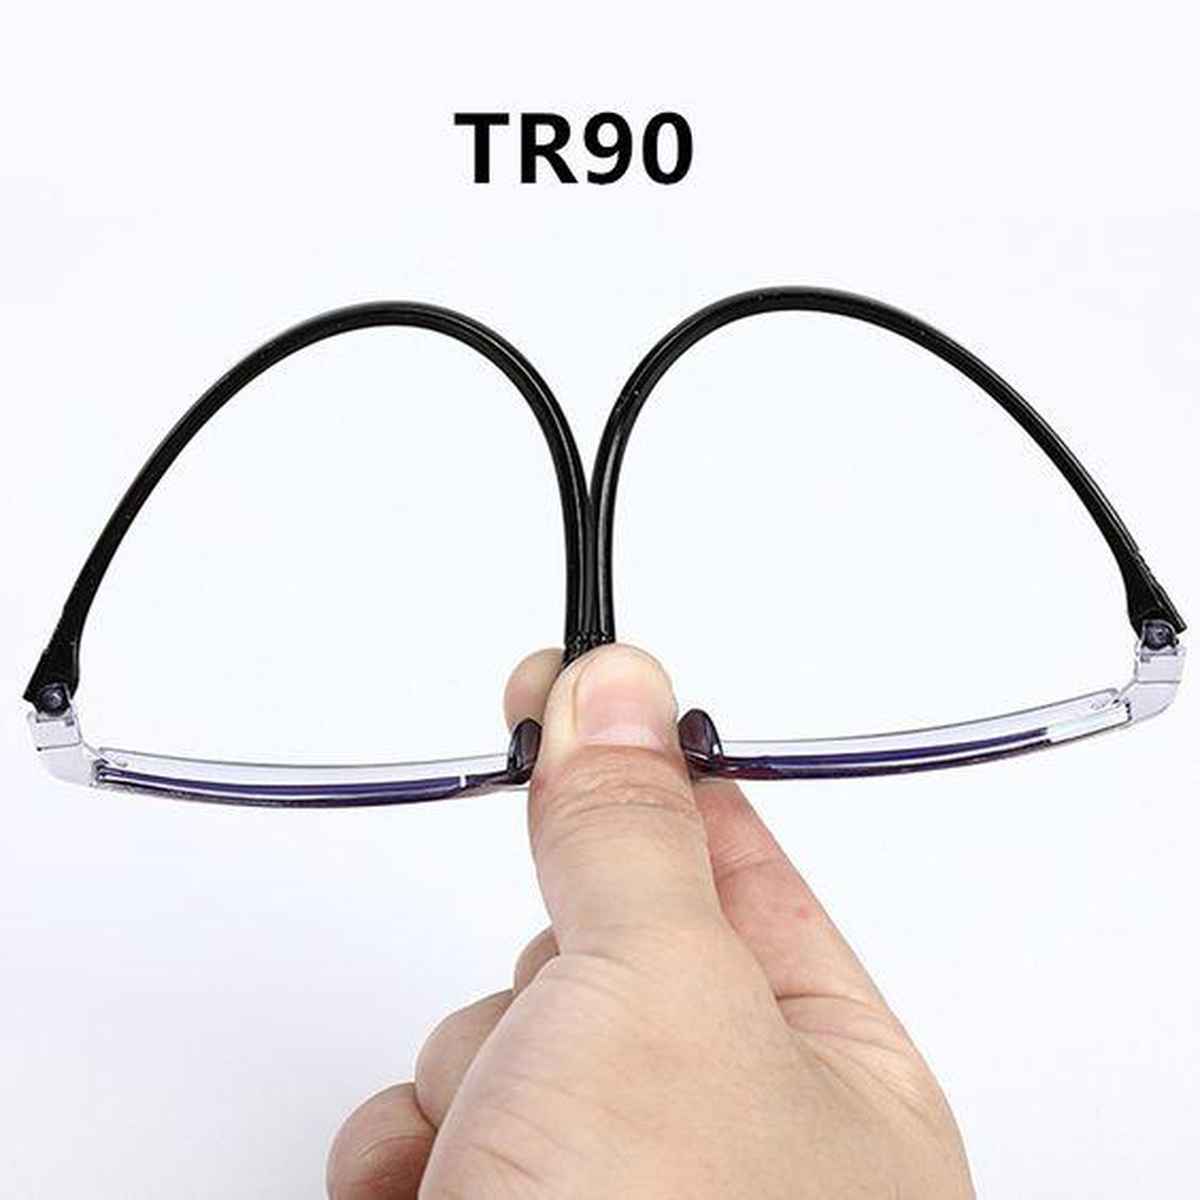 Safety glasses with TR-90 frames known for their exceptional durability and resilience to daily wear and tear.